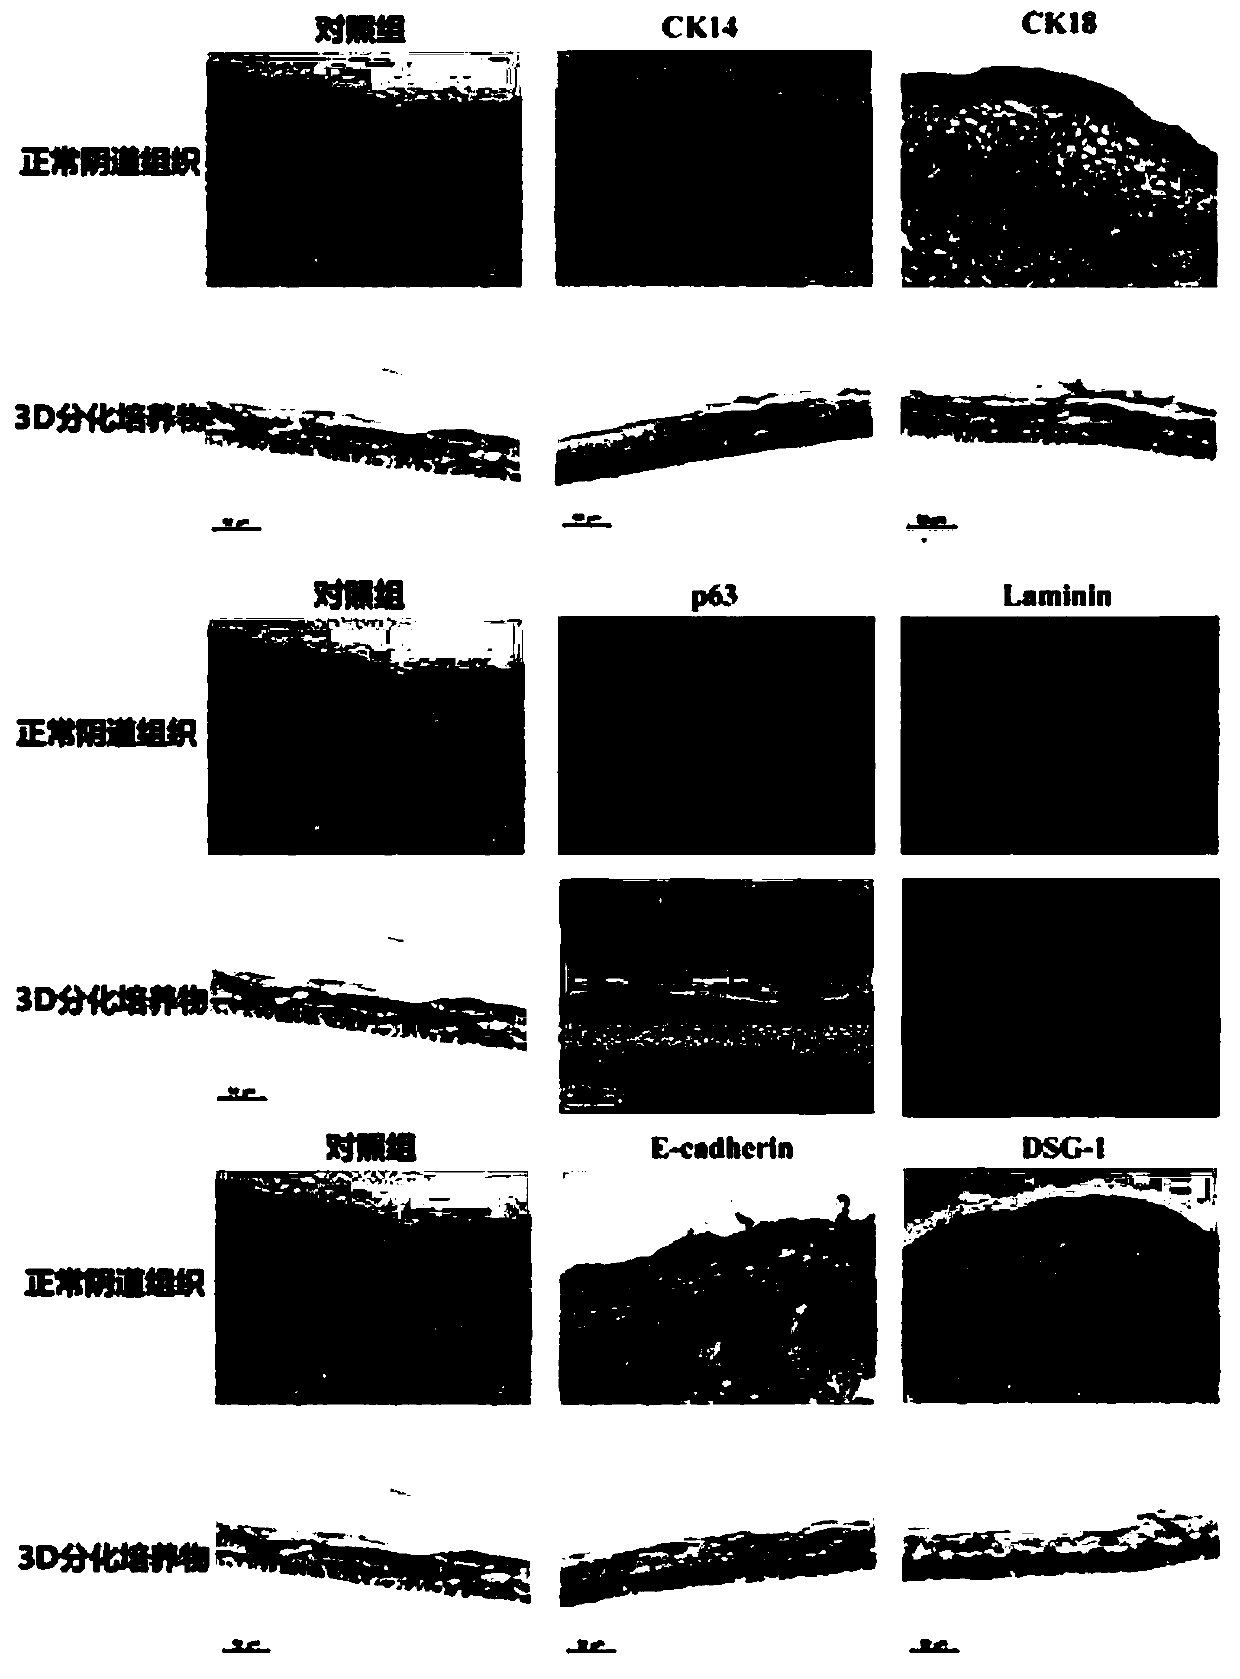 A construction method and application of a human normal vaginal epithelial 3D differentiation culture model